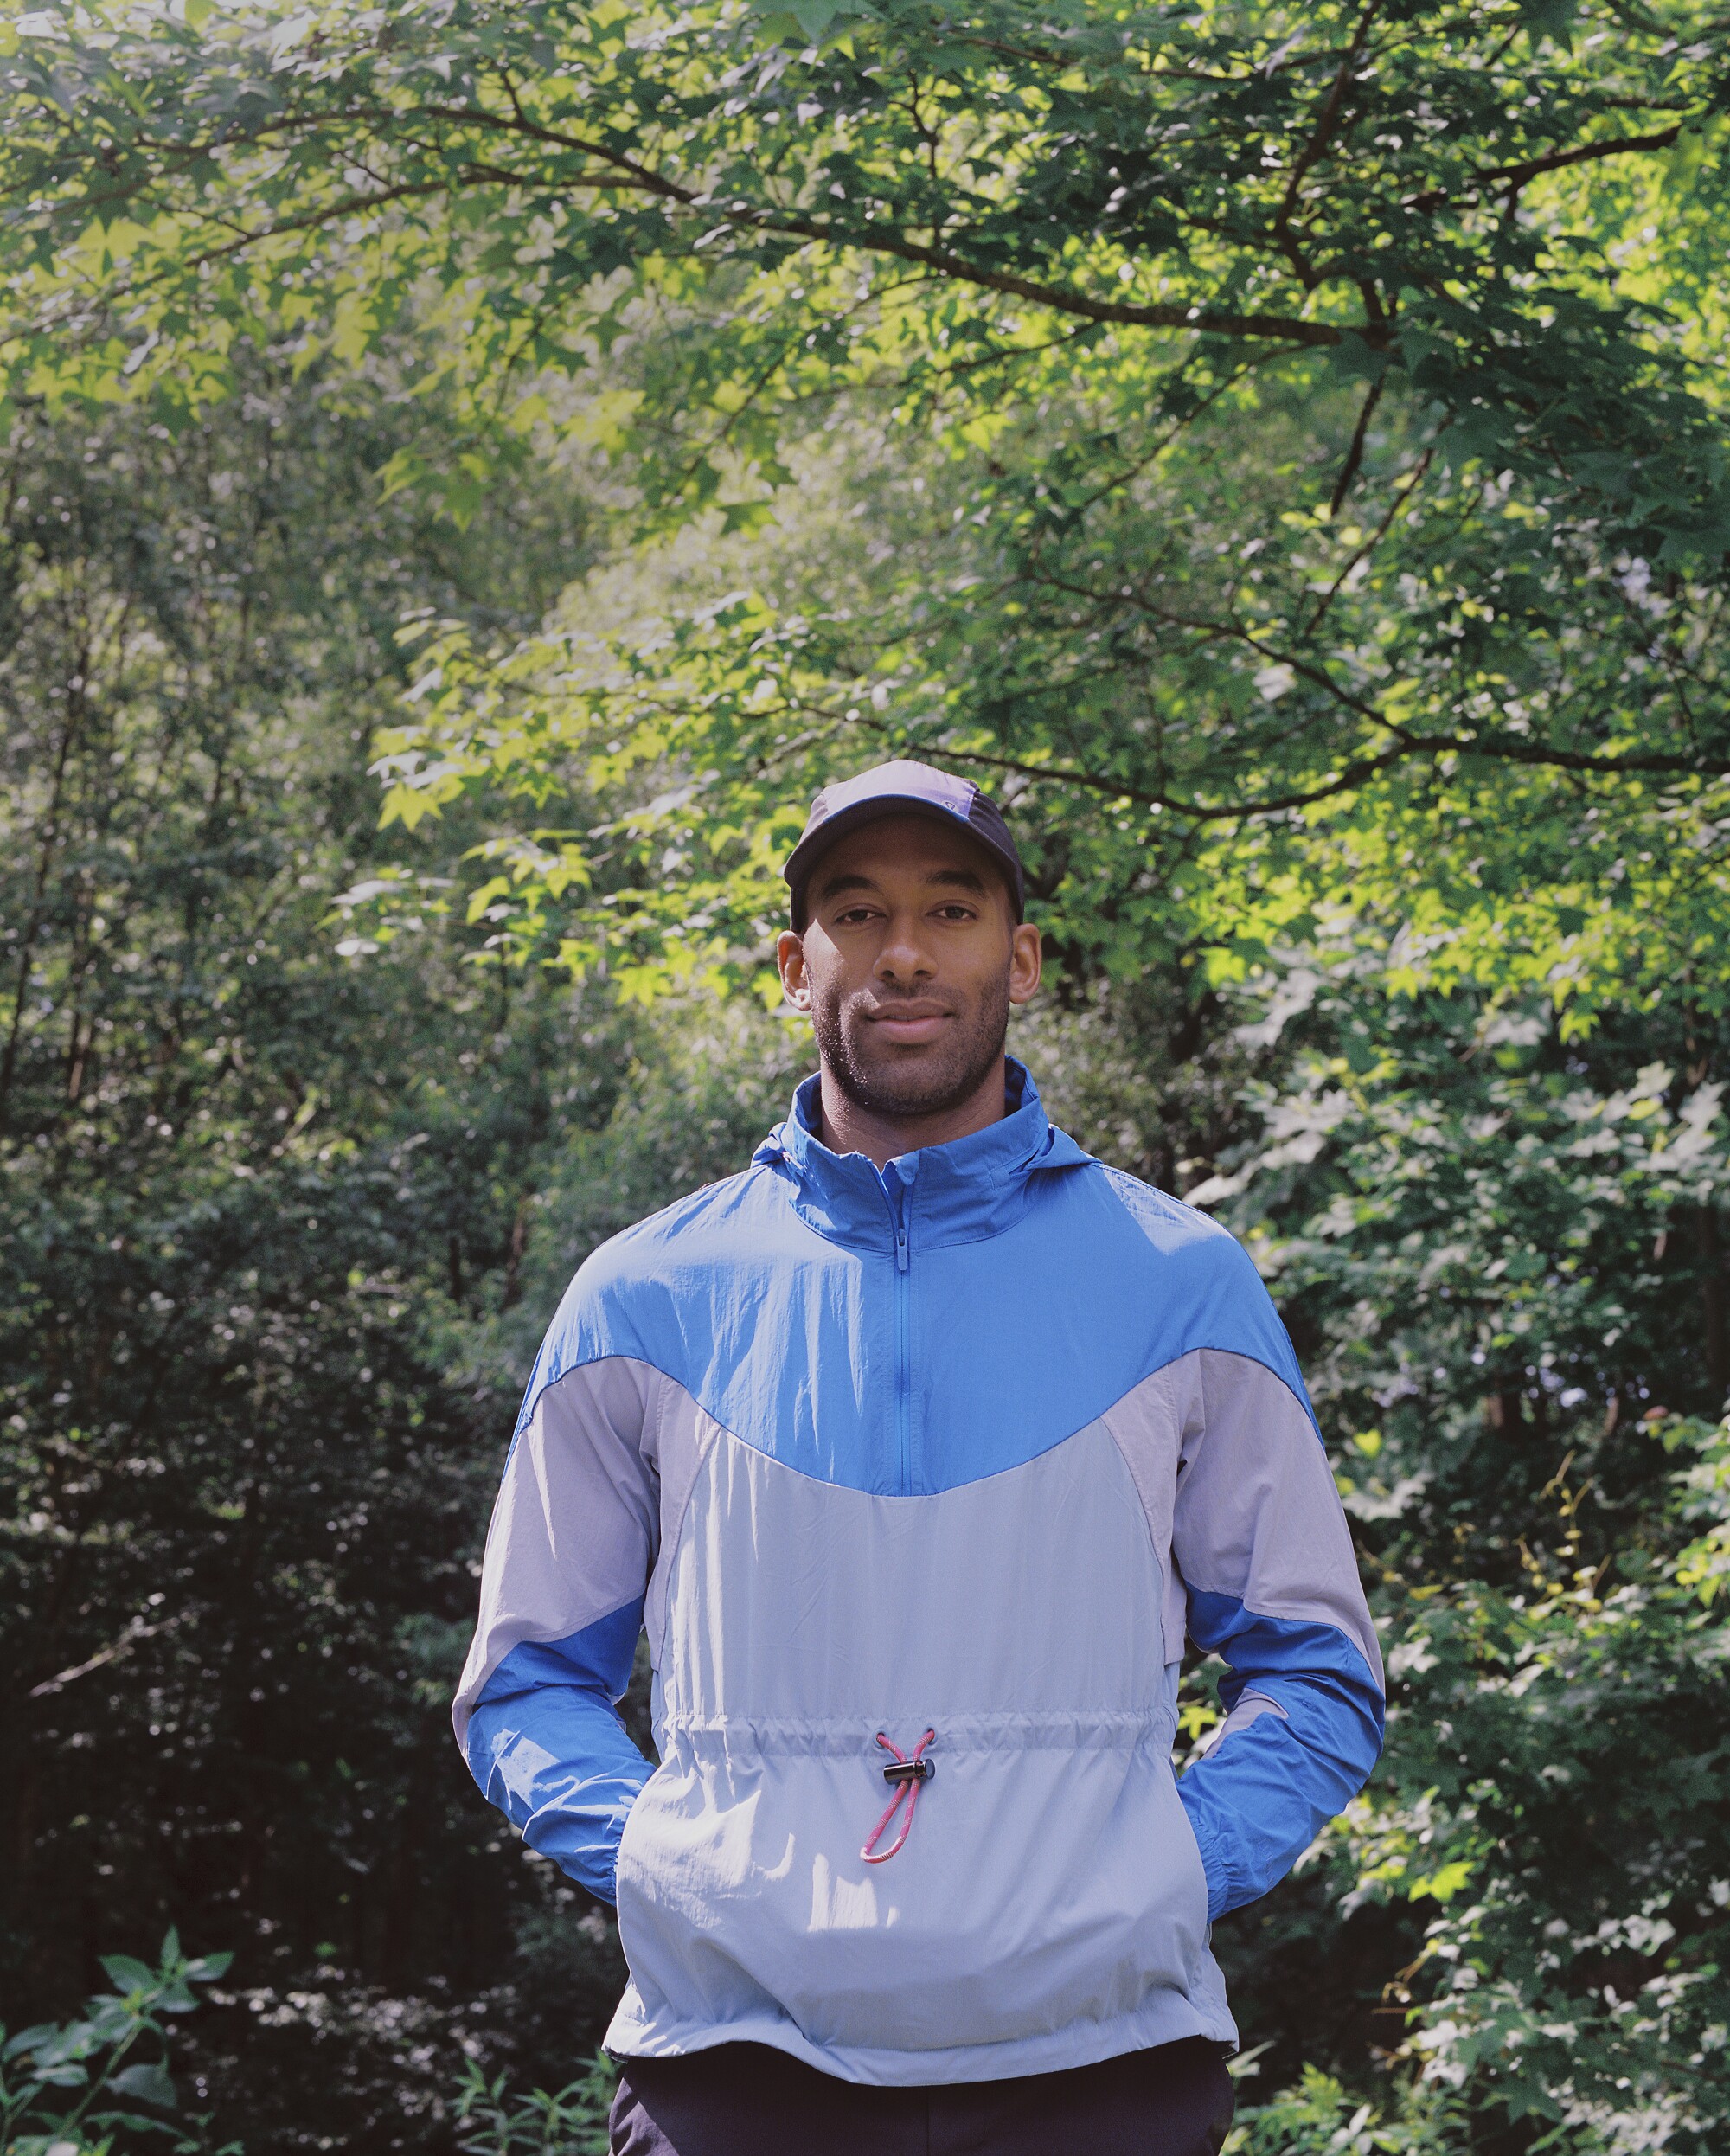 A man wearing a hat and blue windbreaker poses in front of trees.